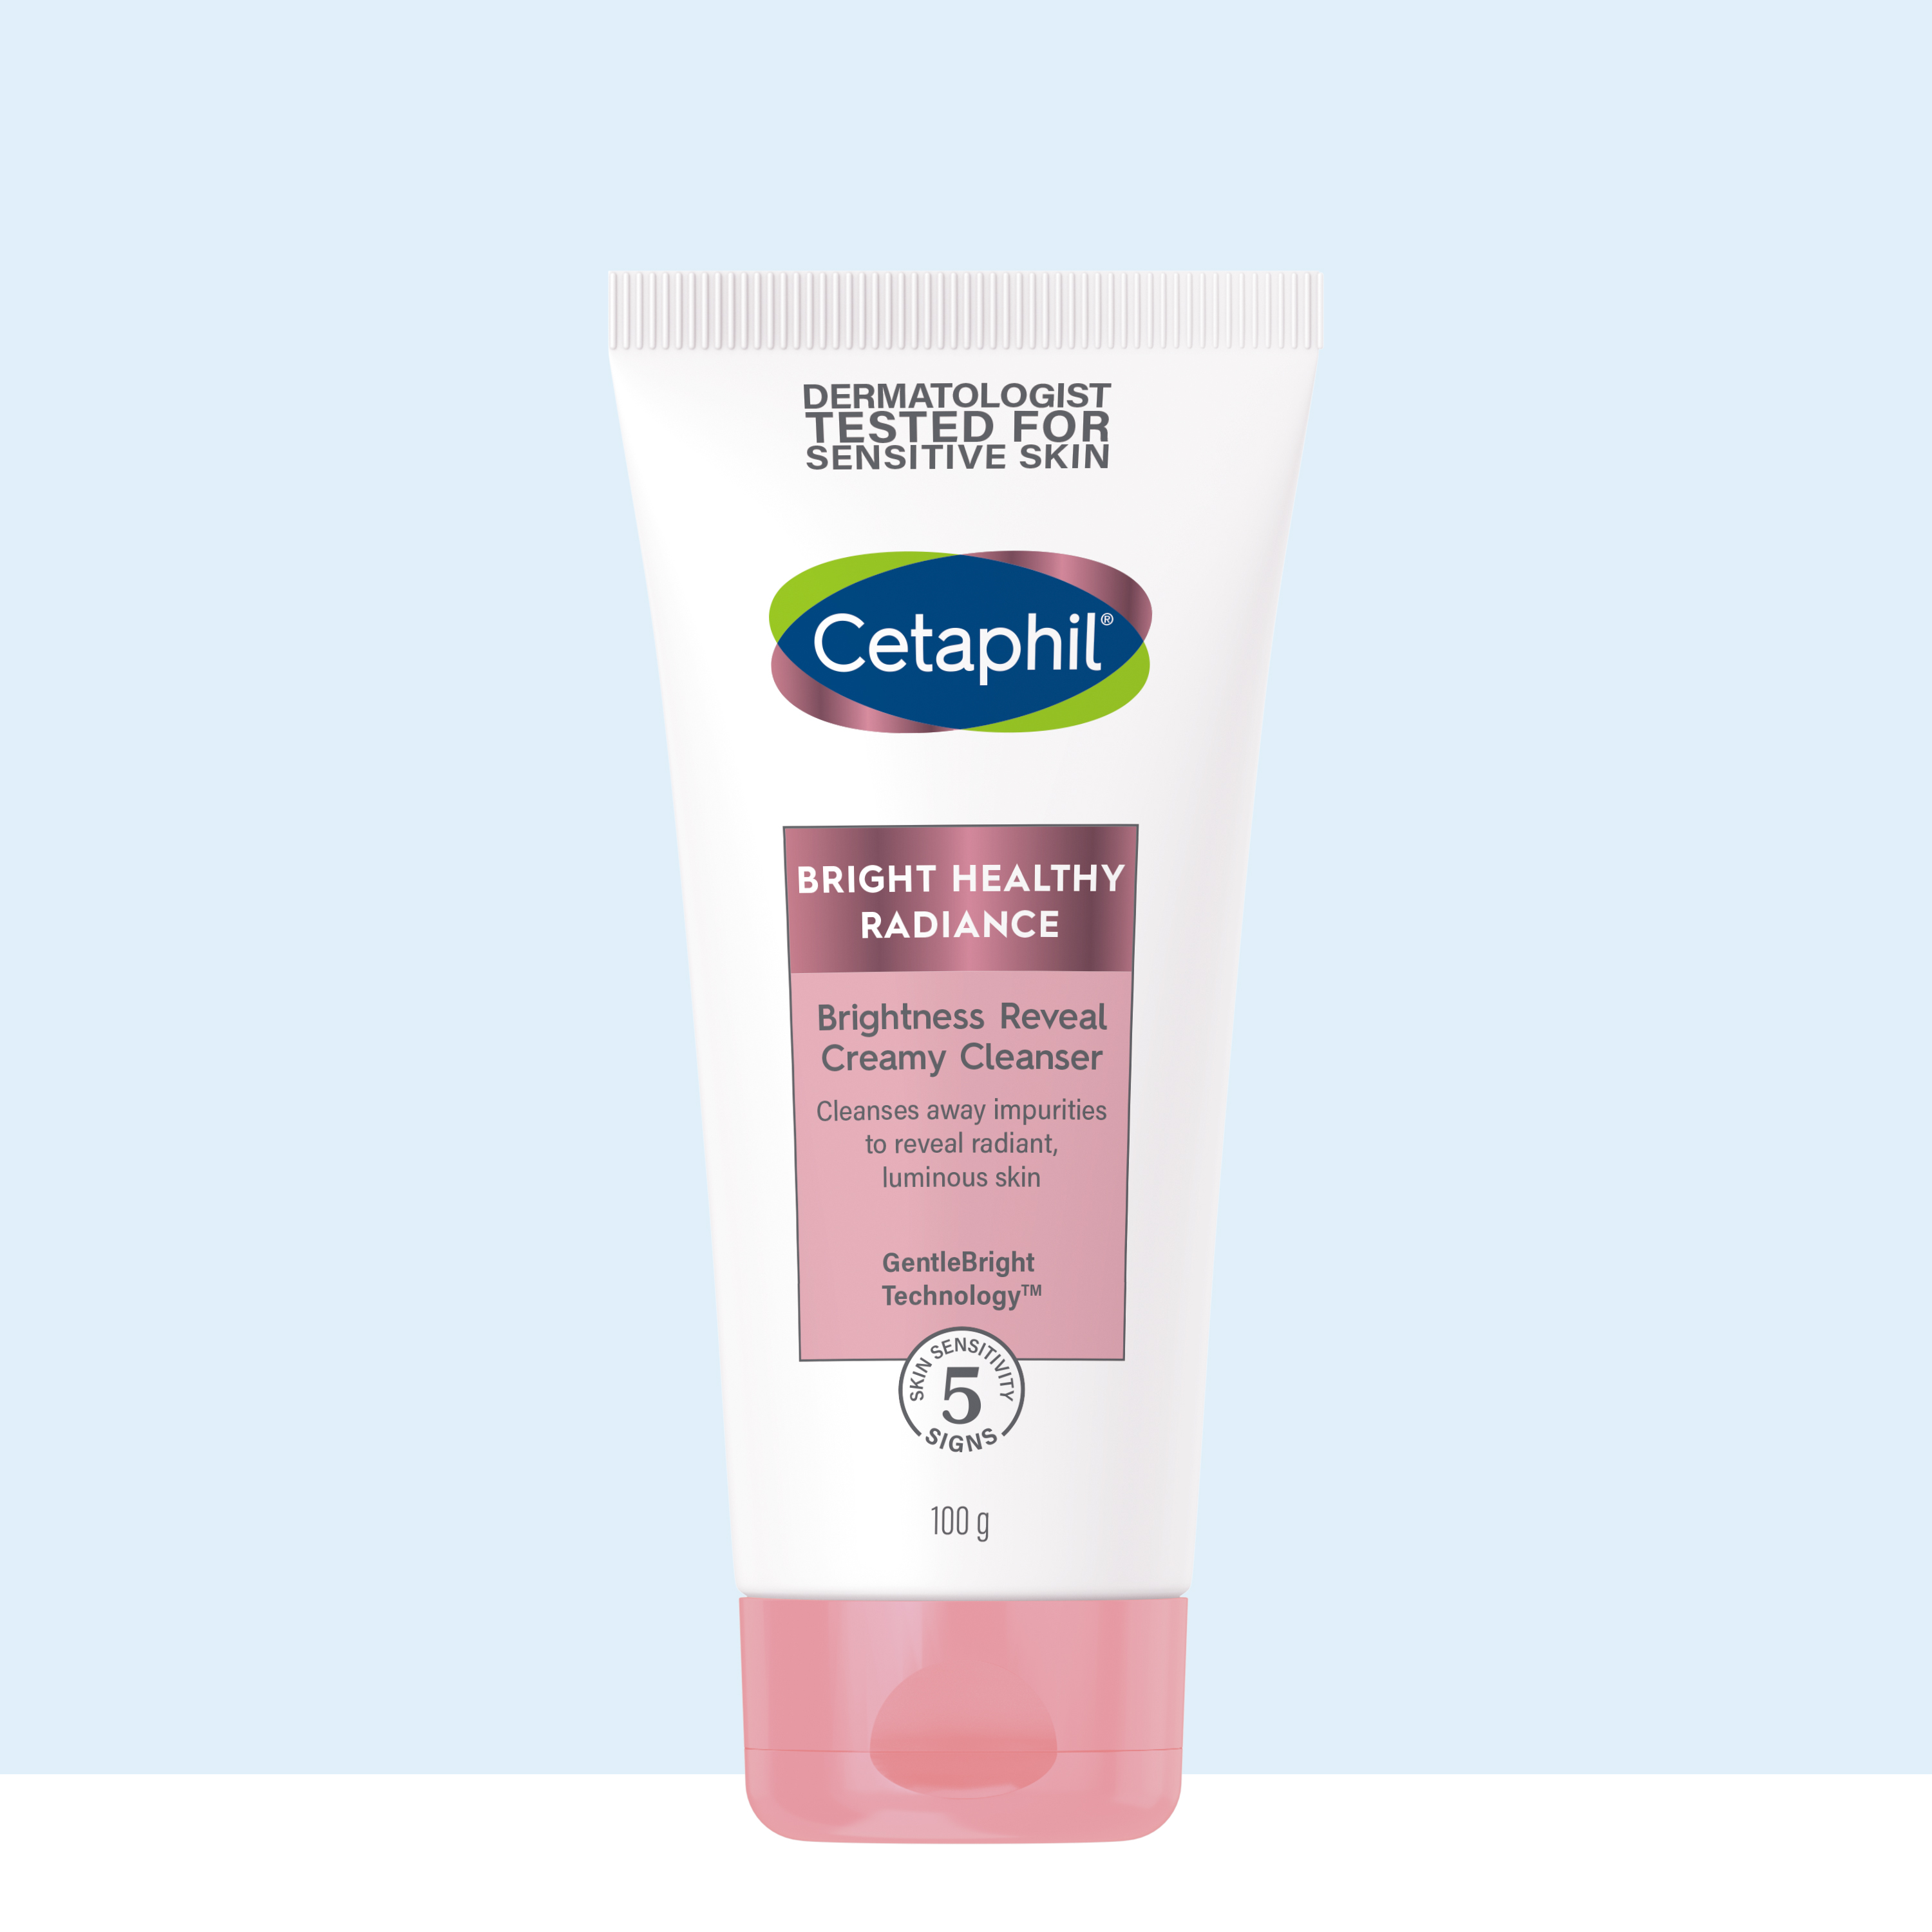 Bright Healthy Radiance Brigthness Reveal Creamy Cleanser